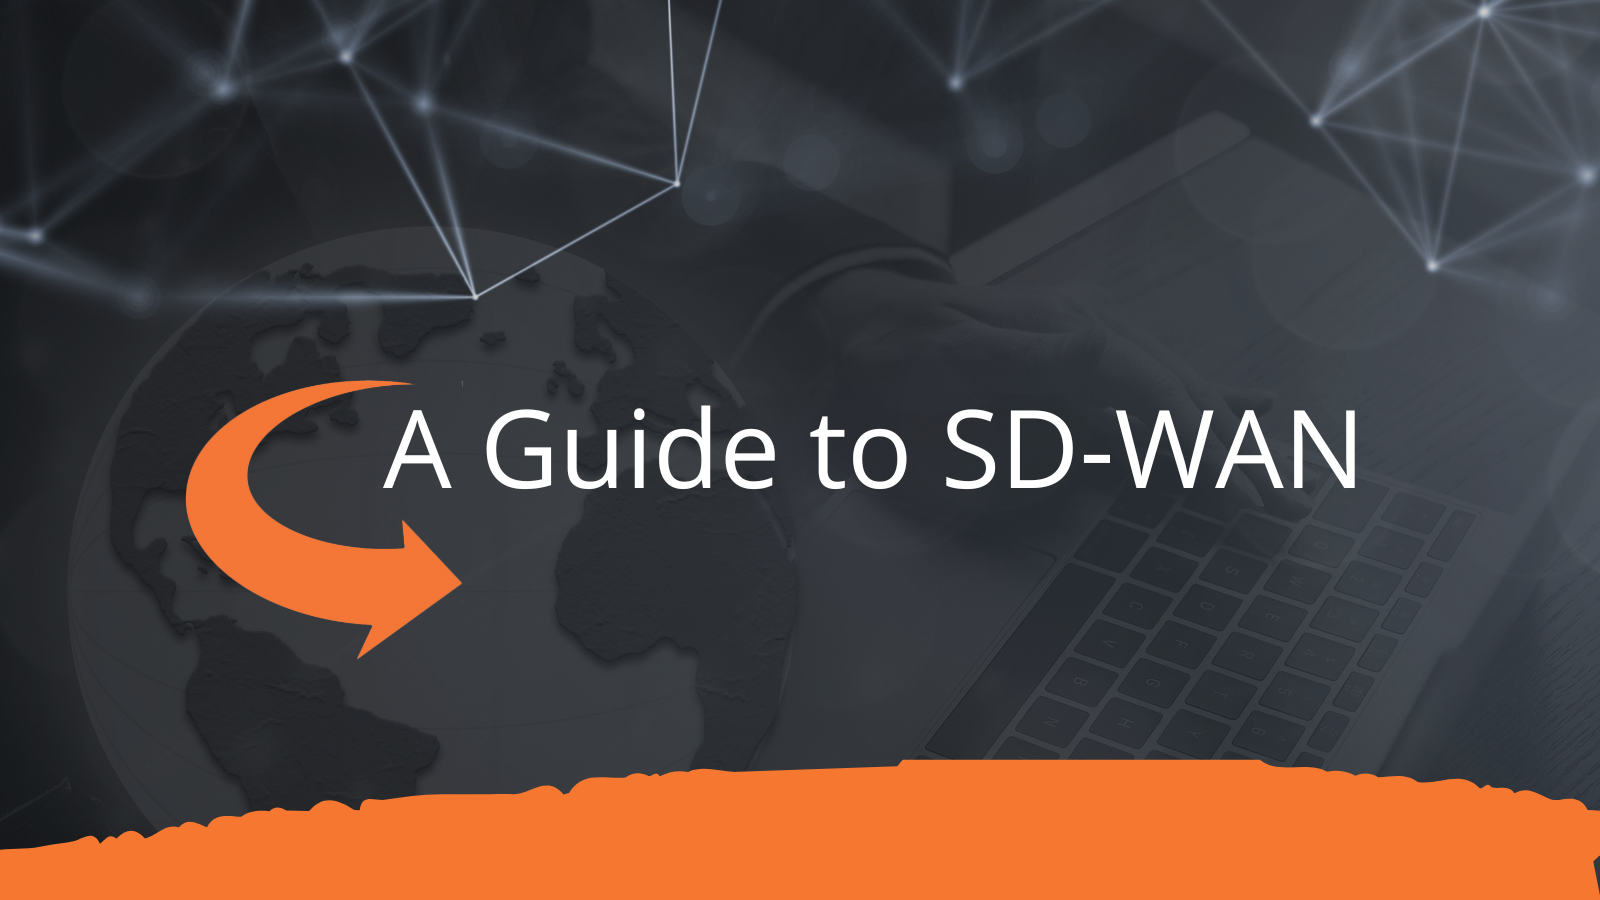 A Guide to SD-WAN